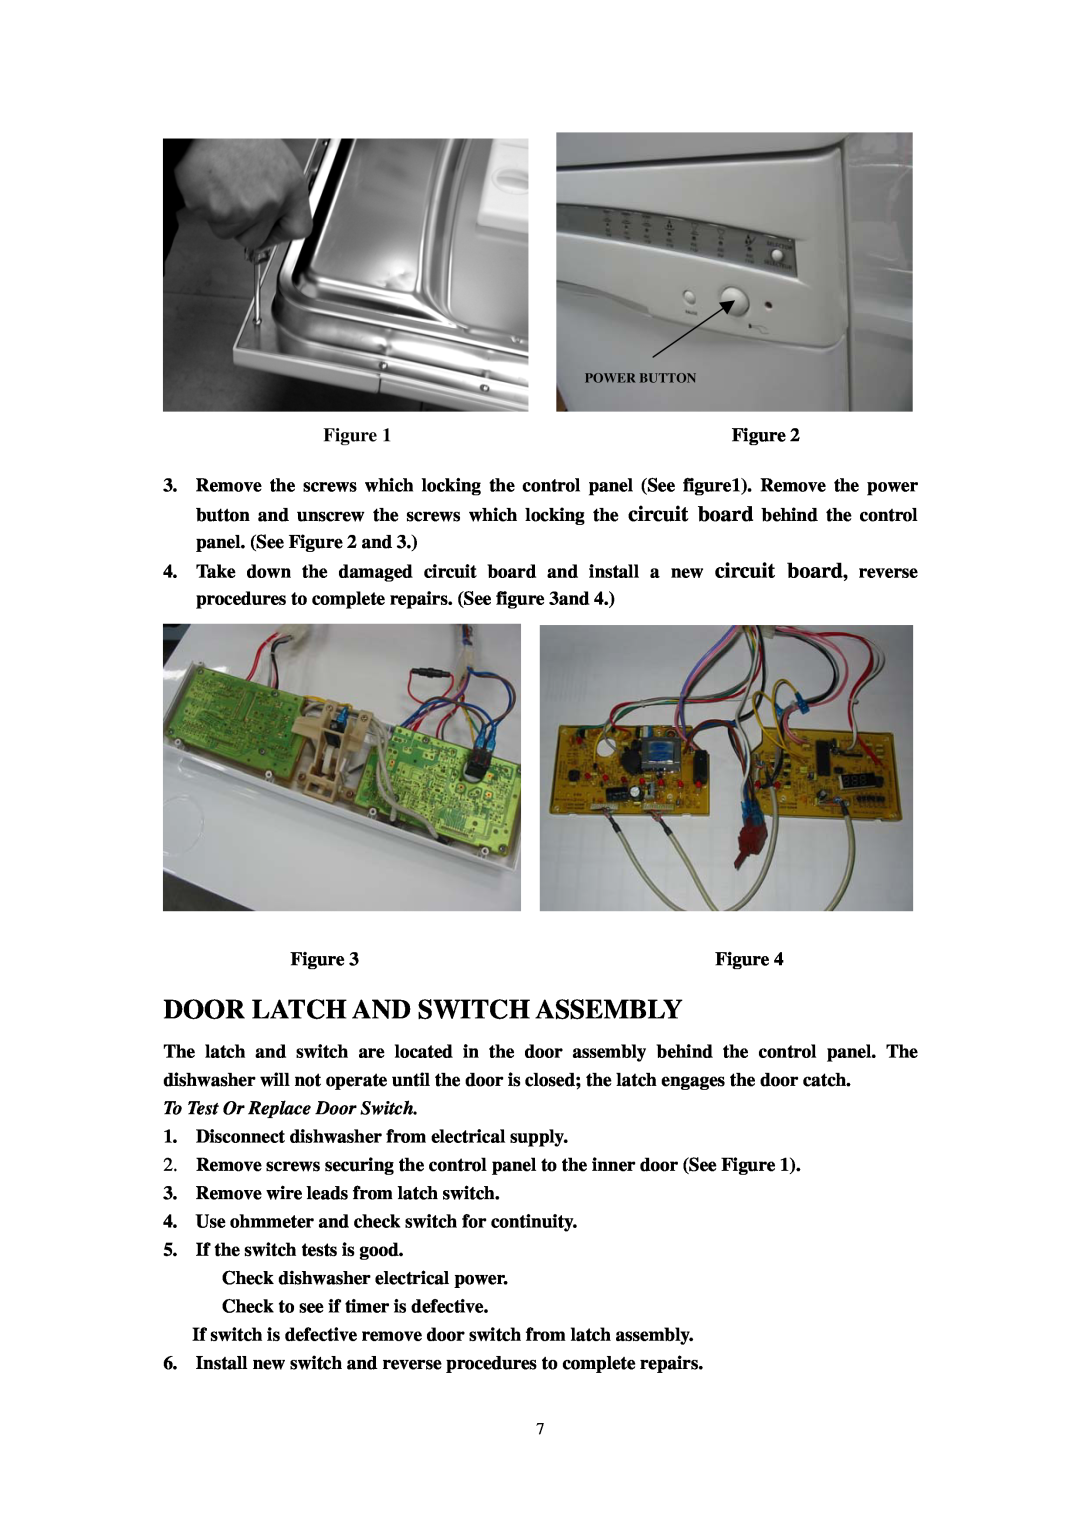 Equator SB 818, WB 818 service manual Door Latch And Switch Assembly, To Test Or Replace Door Switch 